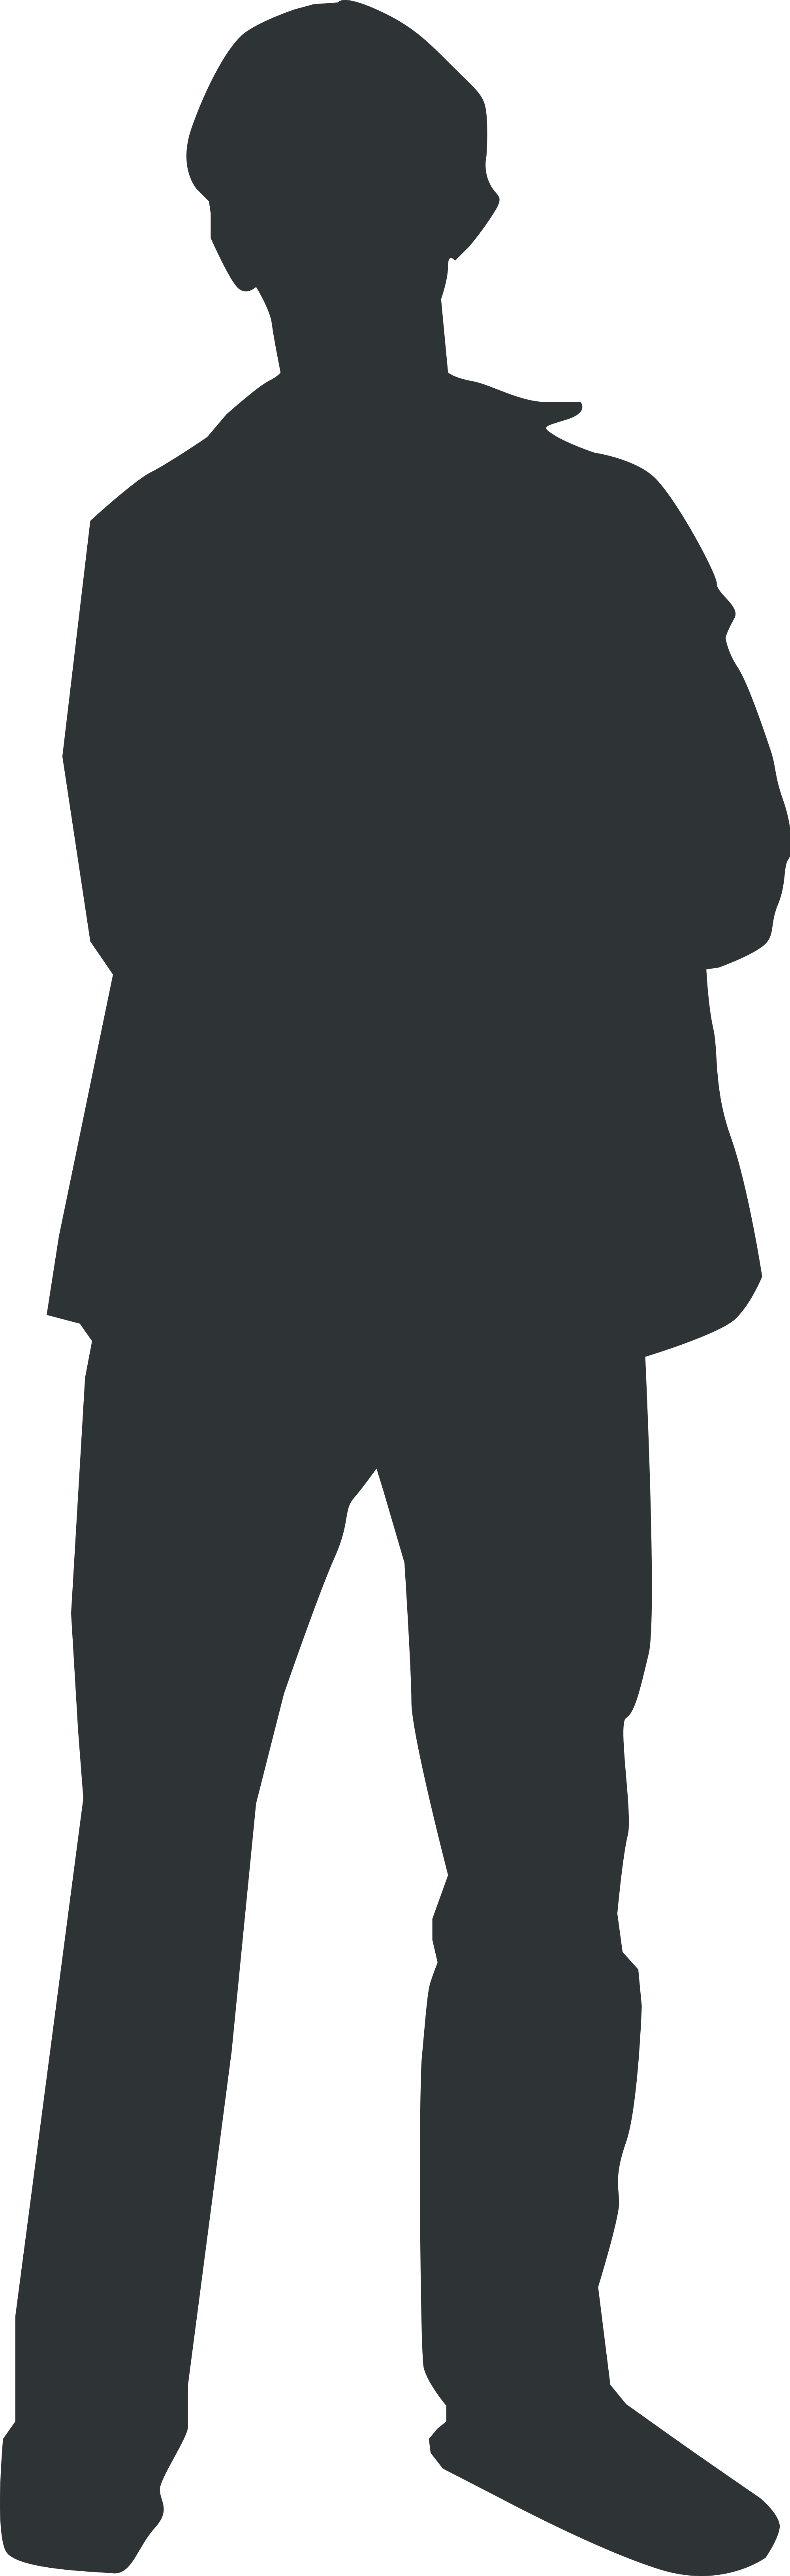 free-person-outline-download-free-person-outline-png-images-free